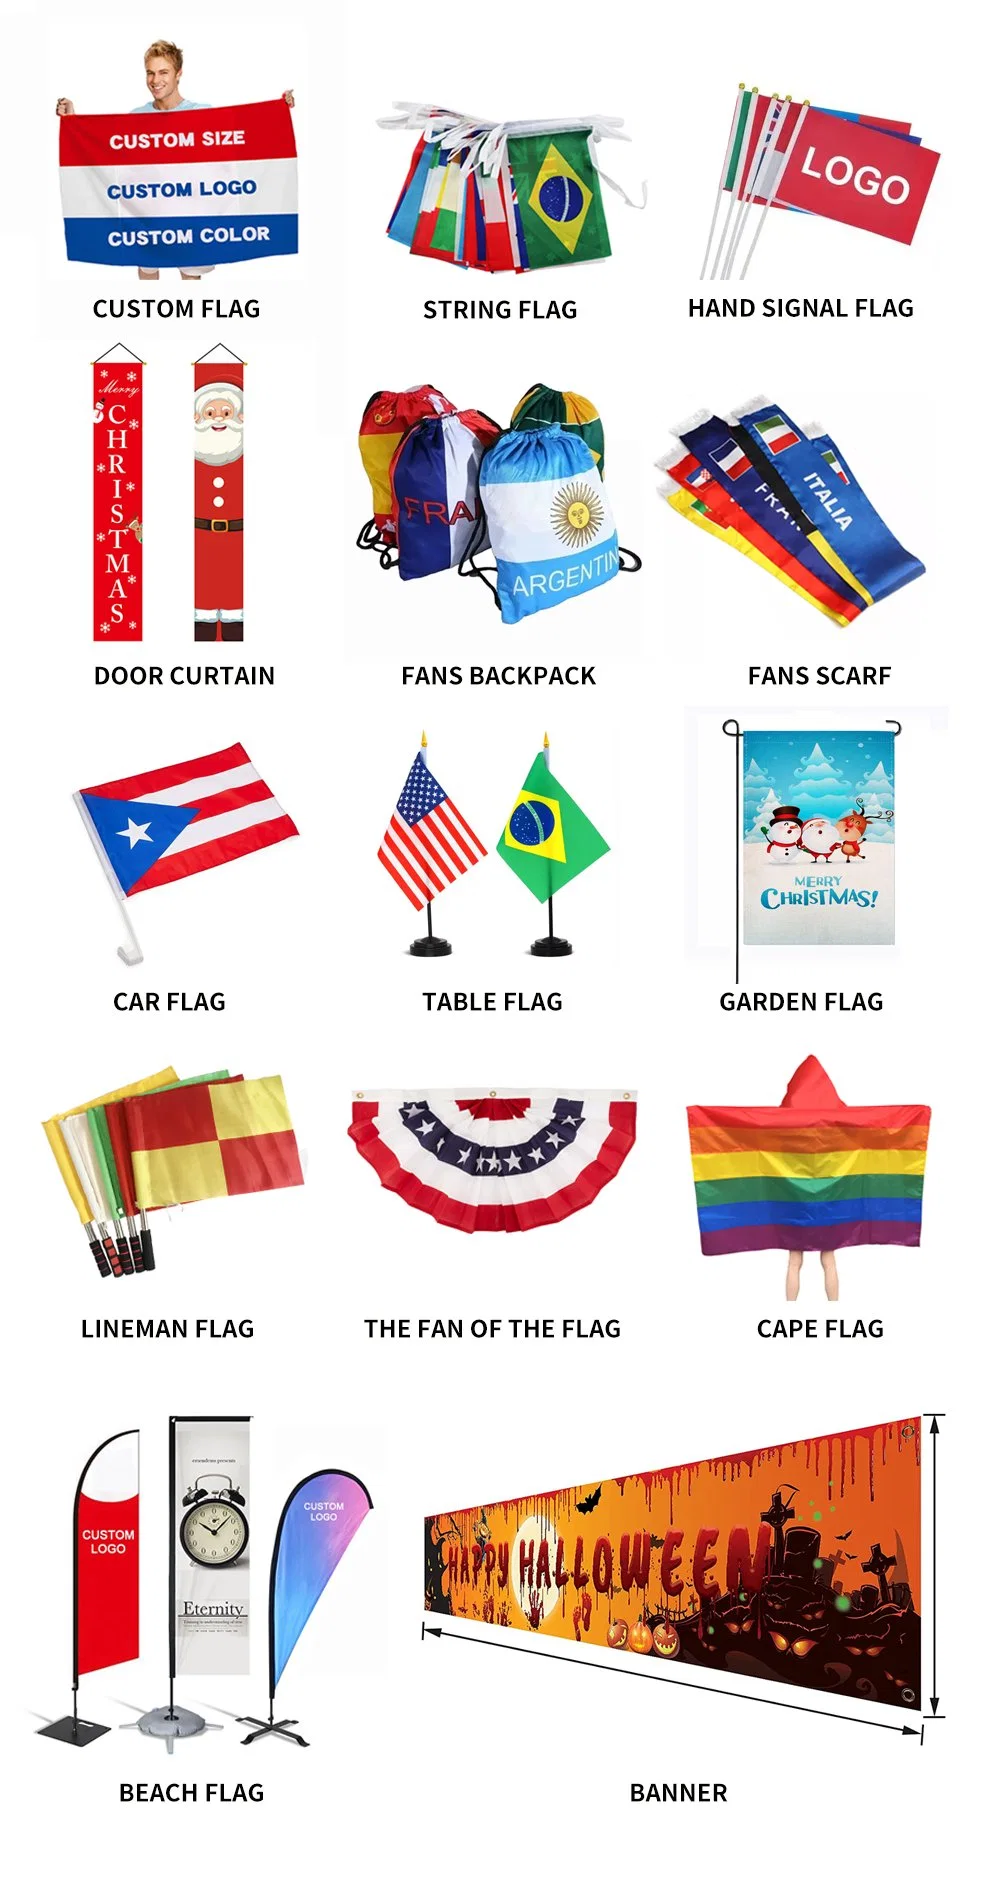 Wholesale High Quality Custom Printed Other Scarves Sports Fans Soccer Scarf